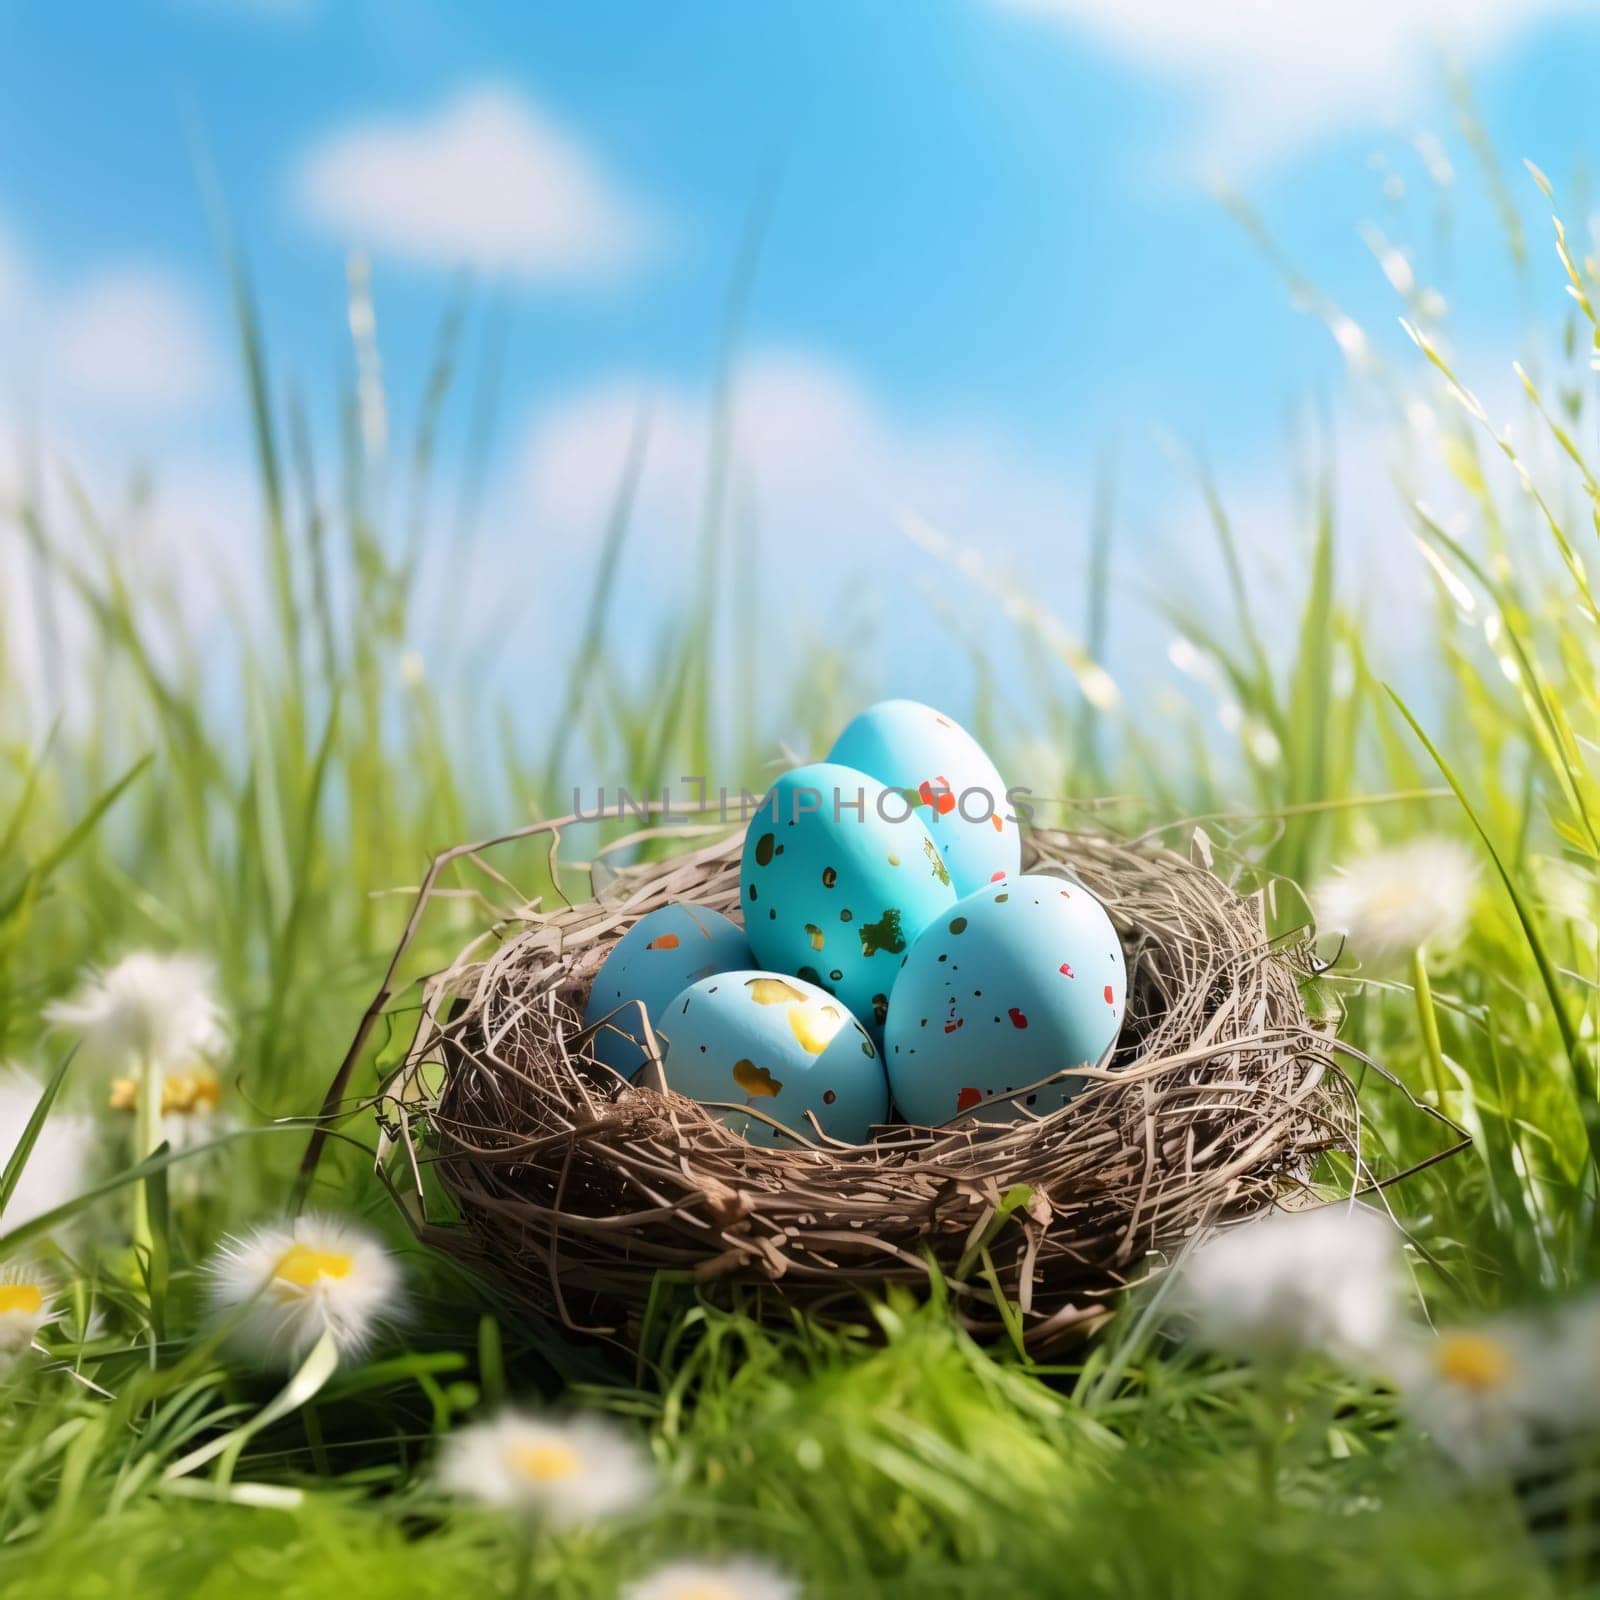 Colorful Easter Eggs Nestled in Grass Under Blue Sky by ThemesS